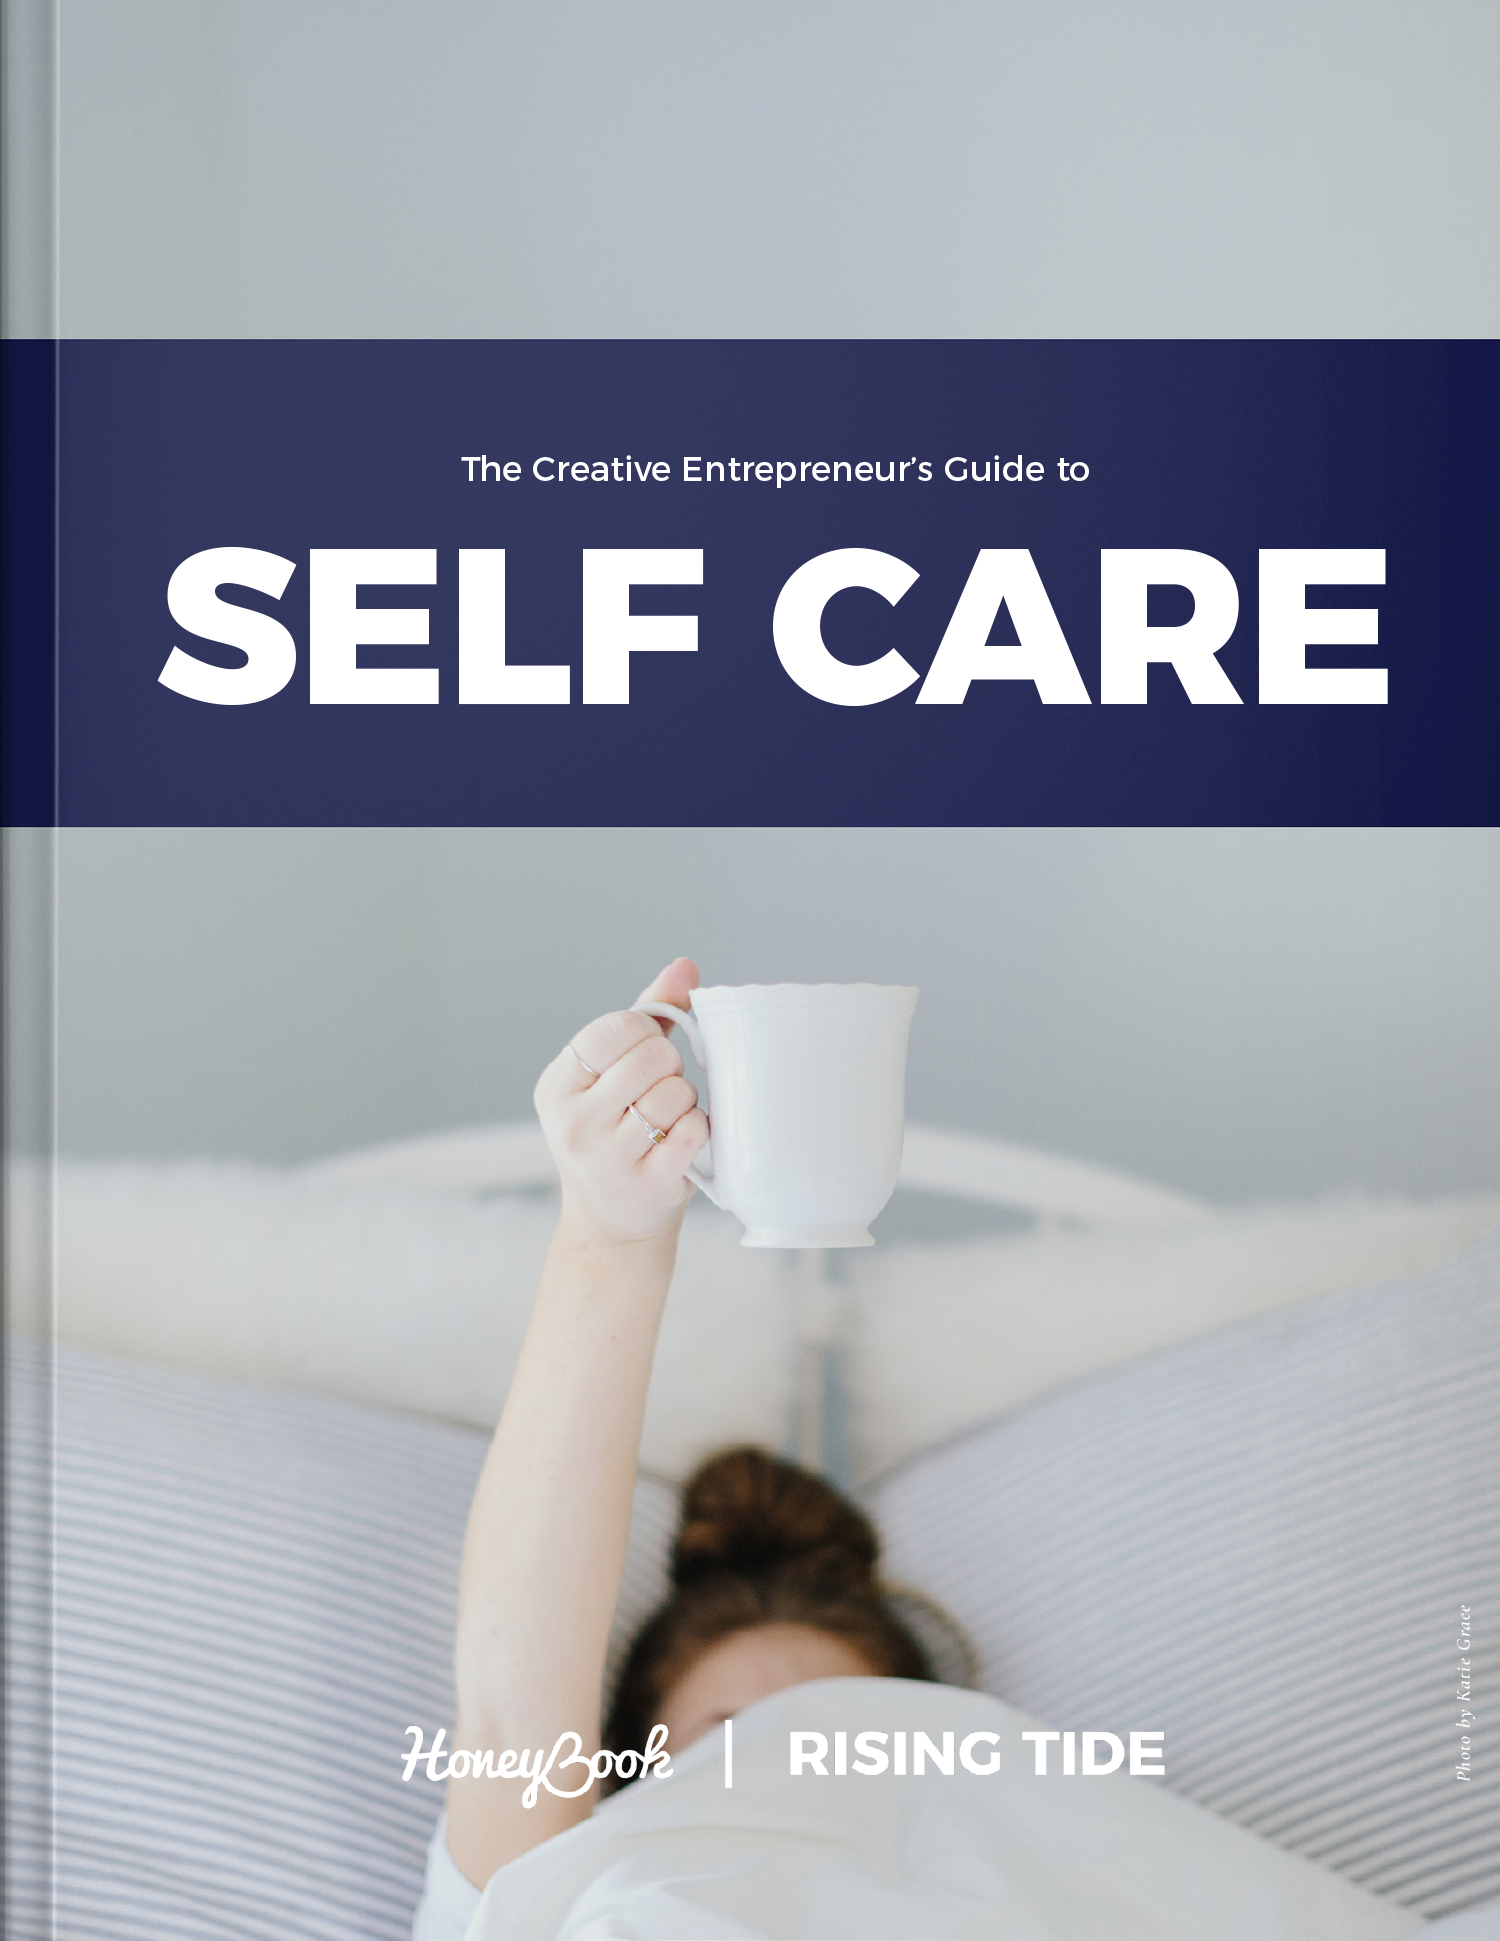 May is Self Care Month